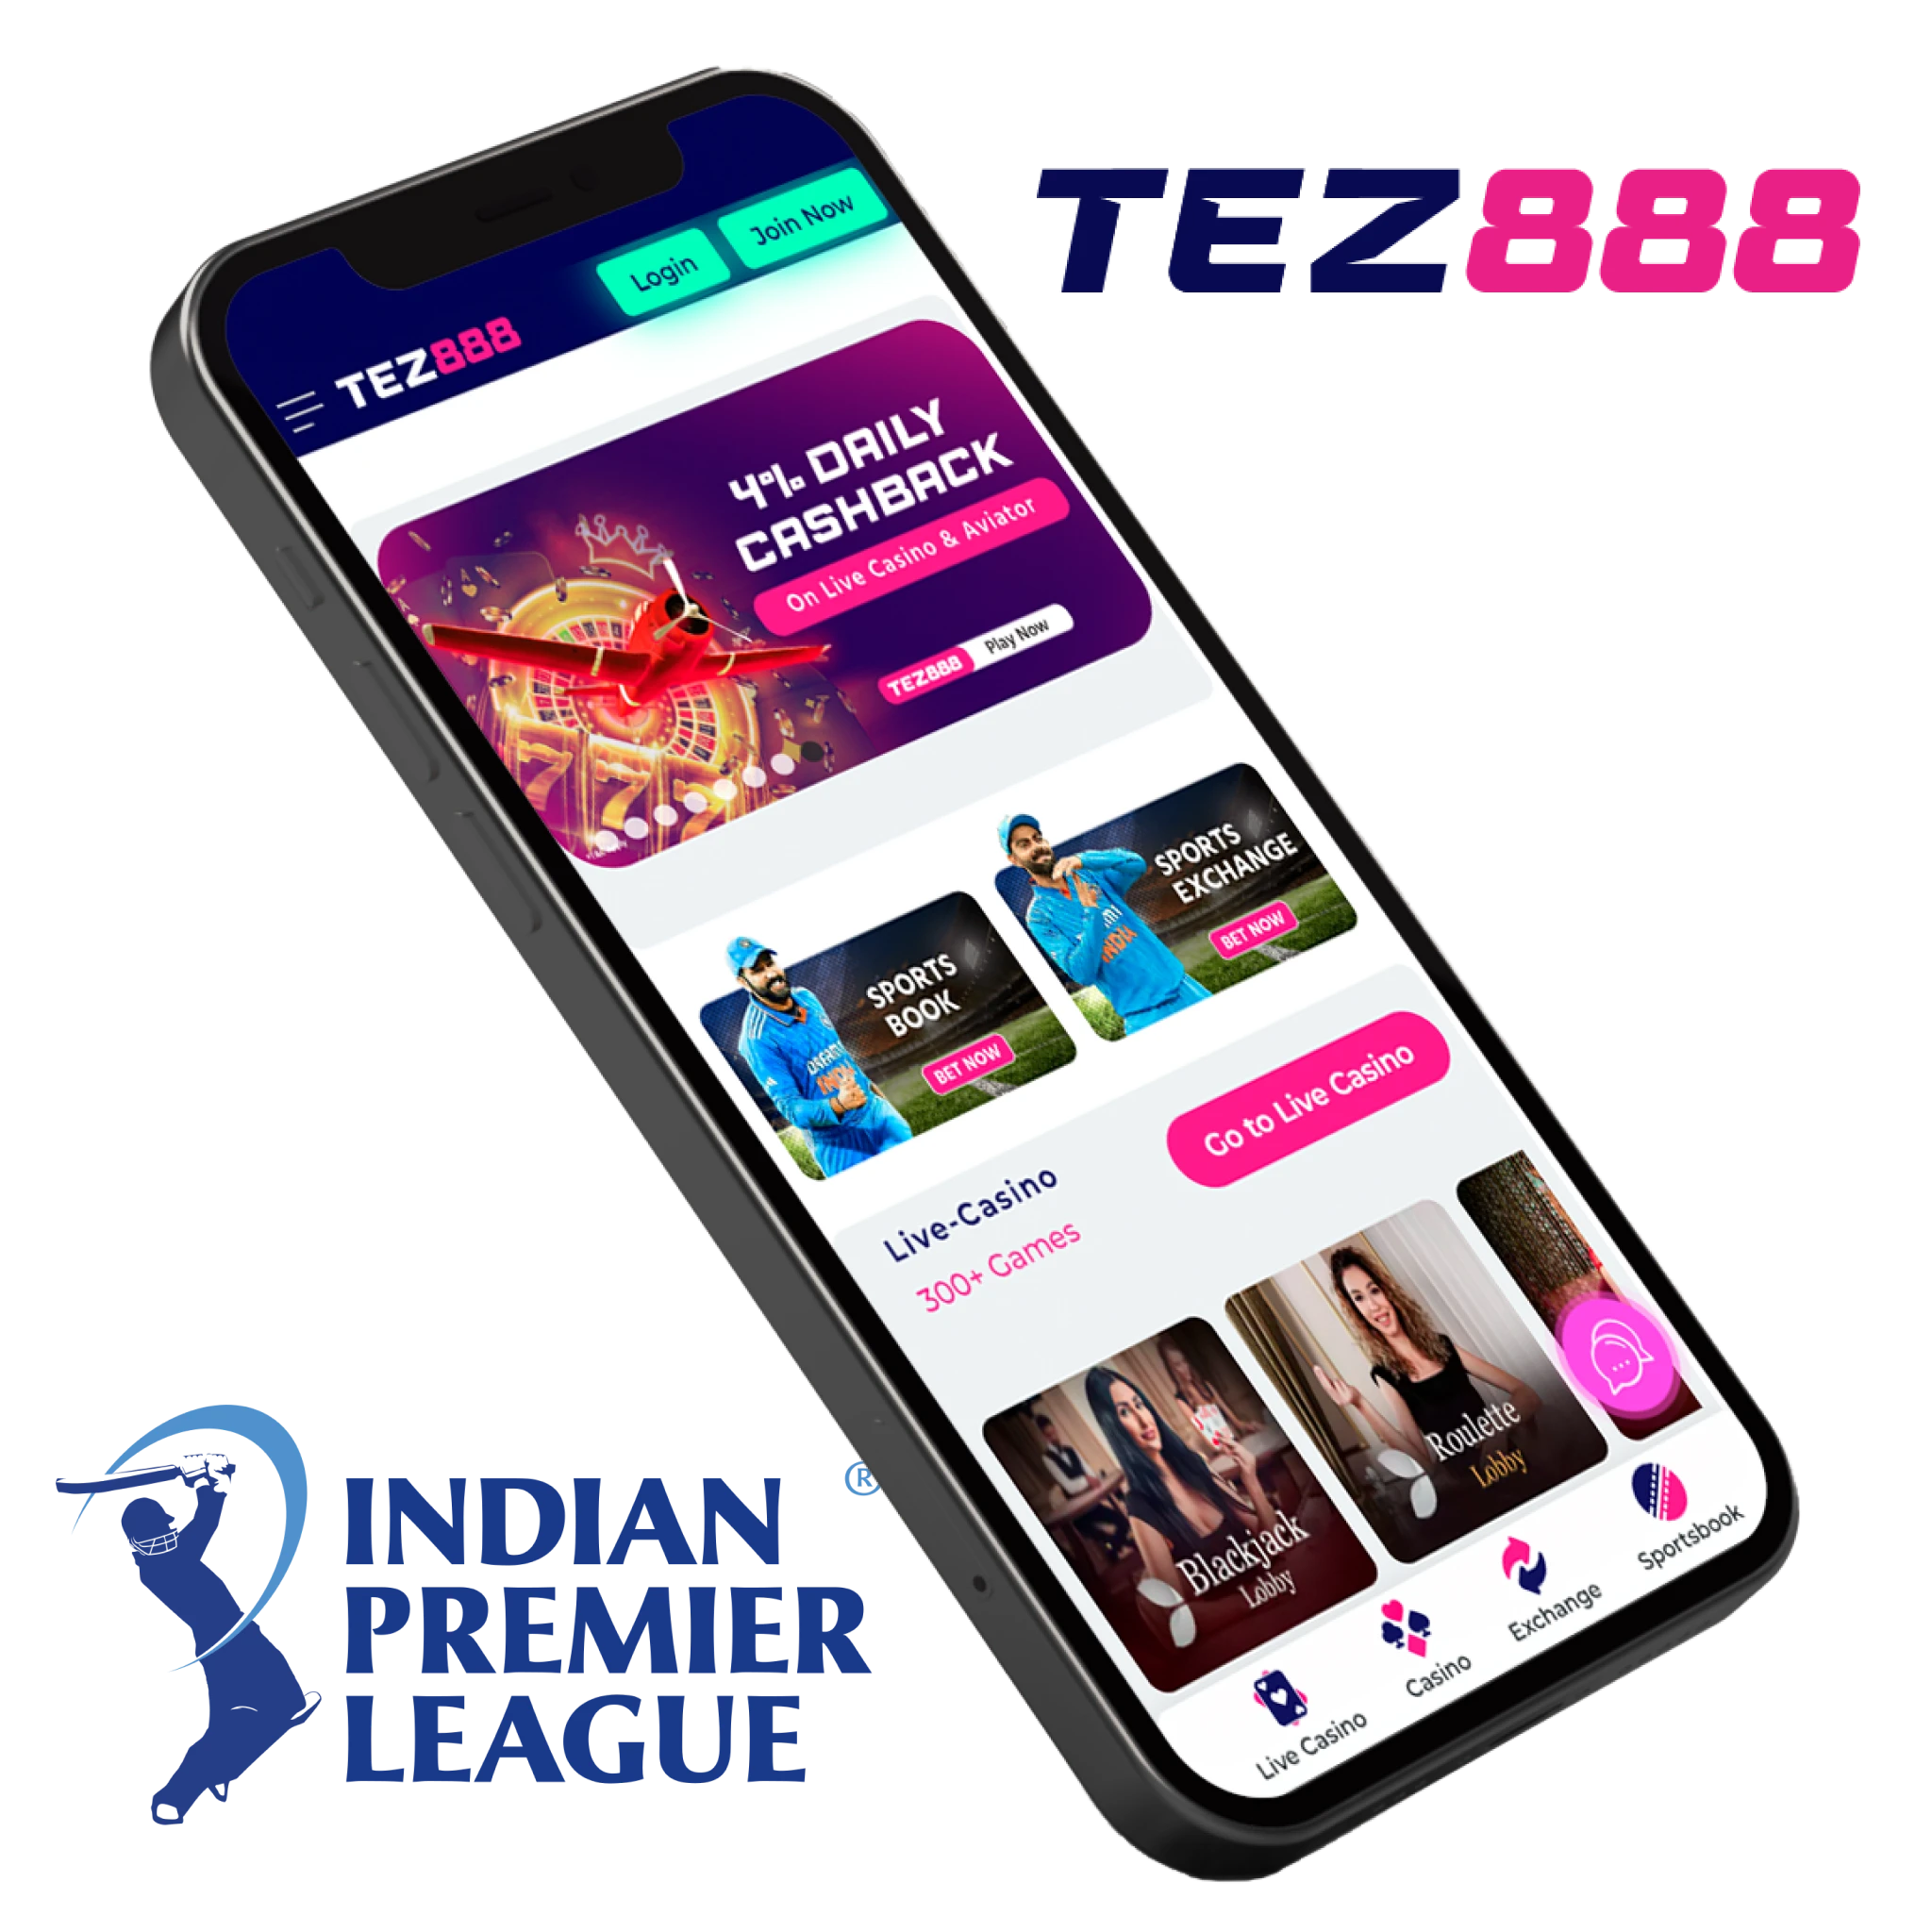 Access Tez888 and start betting on IPL matches hassle-free!